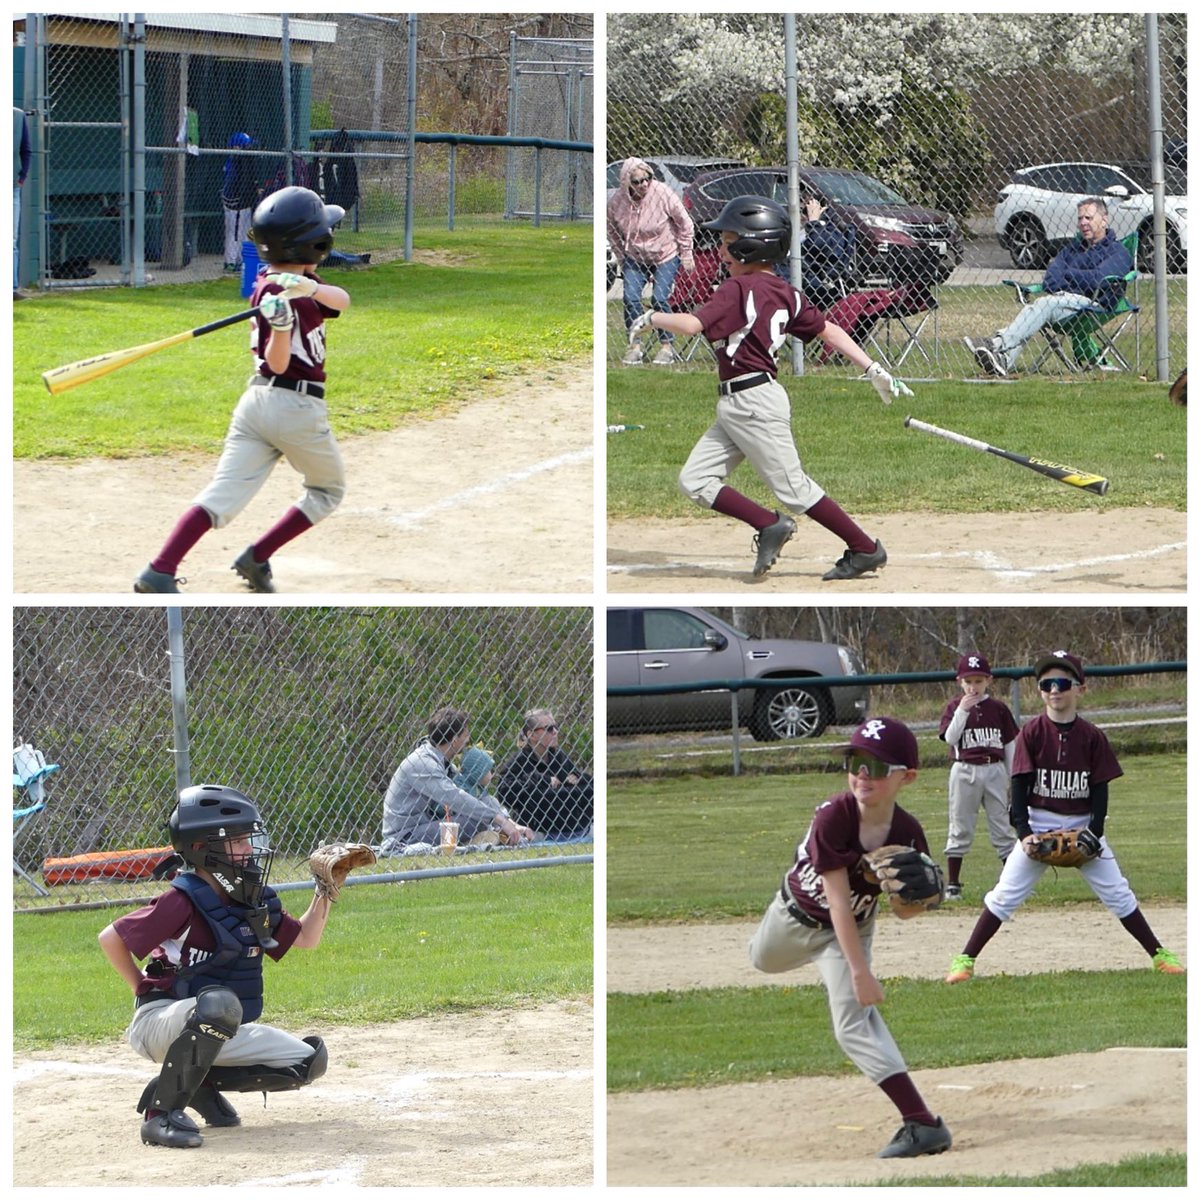 Opening Day. First year of kids pitching and catching, so Leo did both. He’s got that Yankee Stadium swing. This is Grandpa Zog’s idea of click bait!